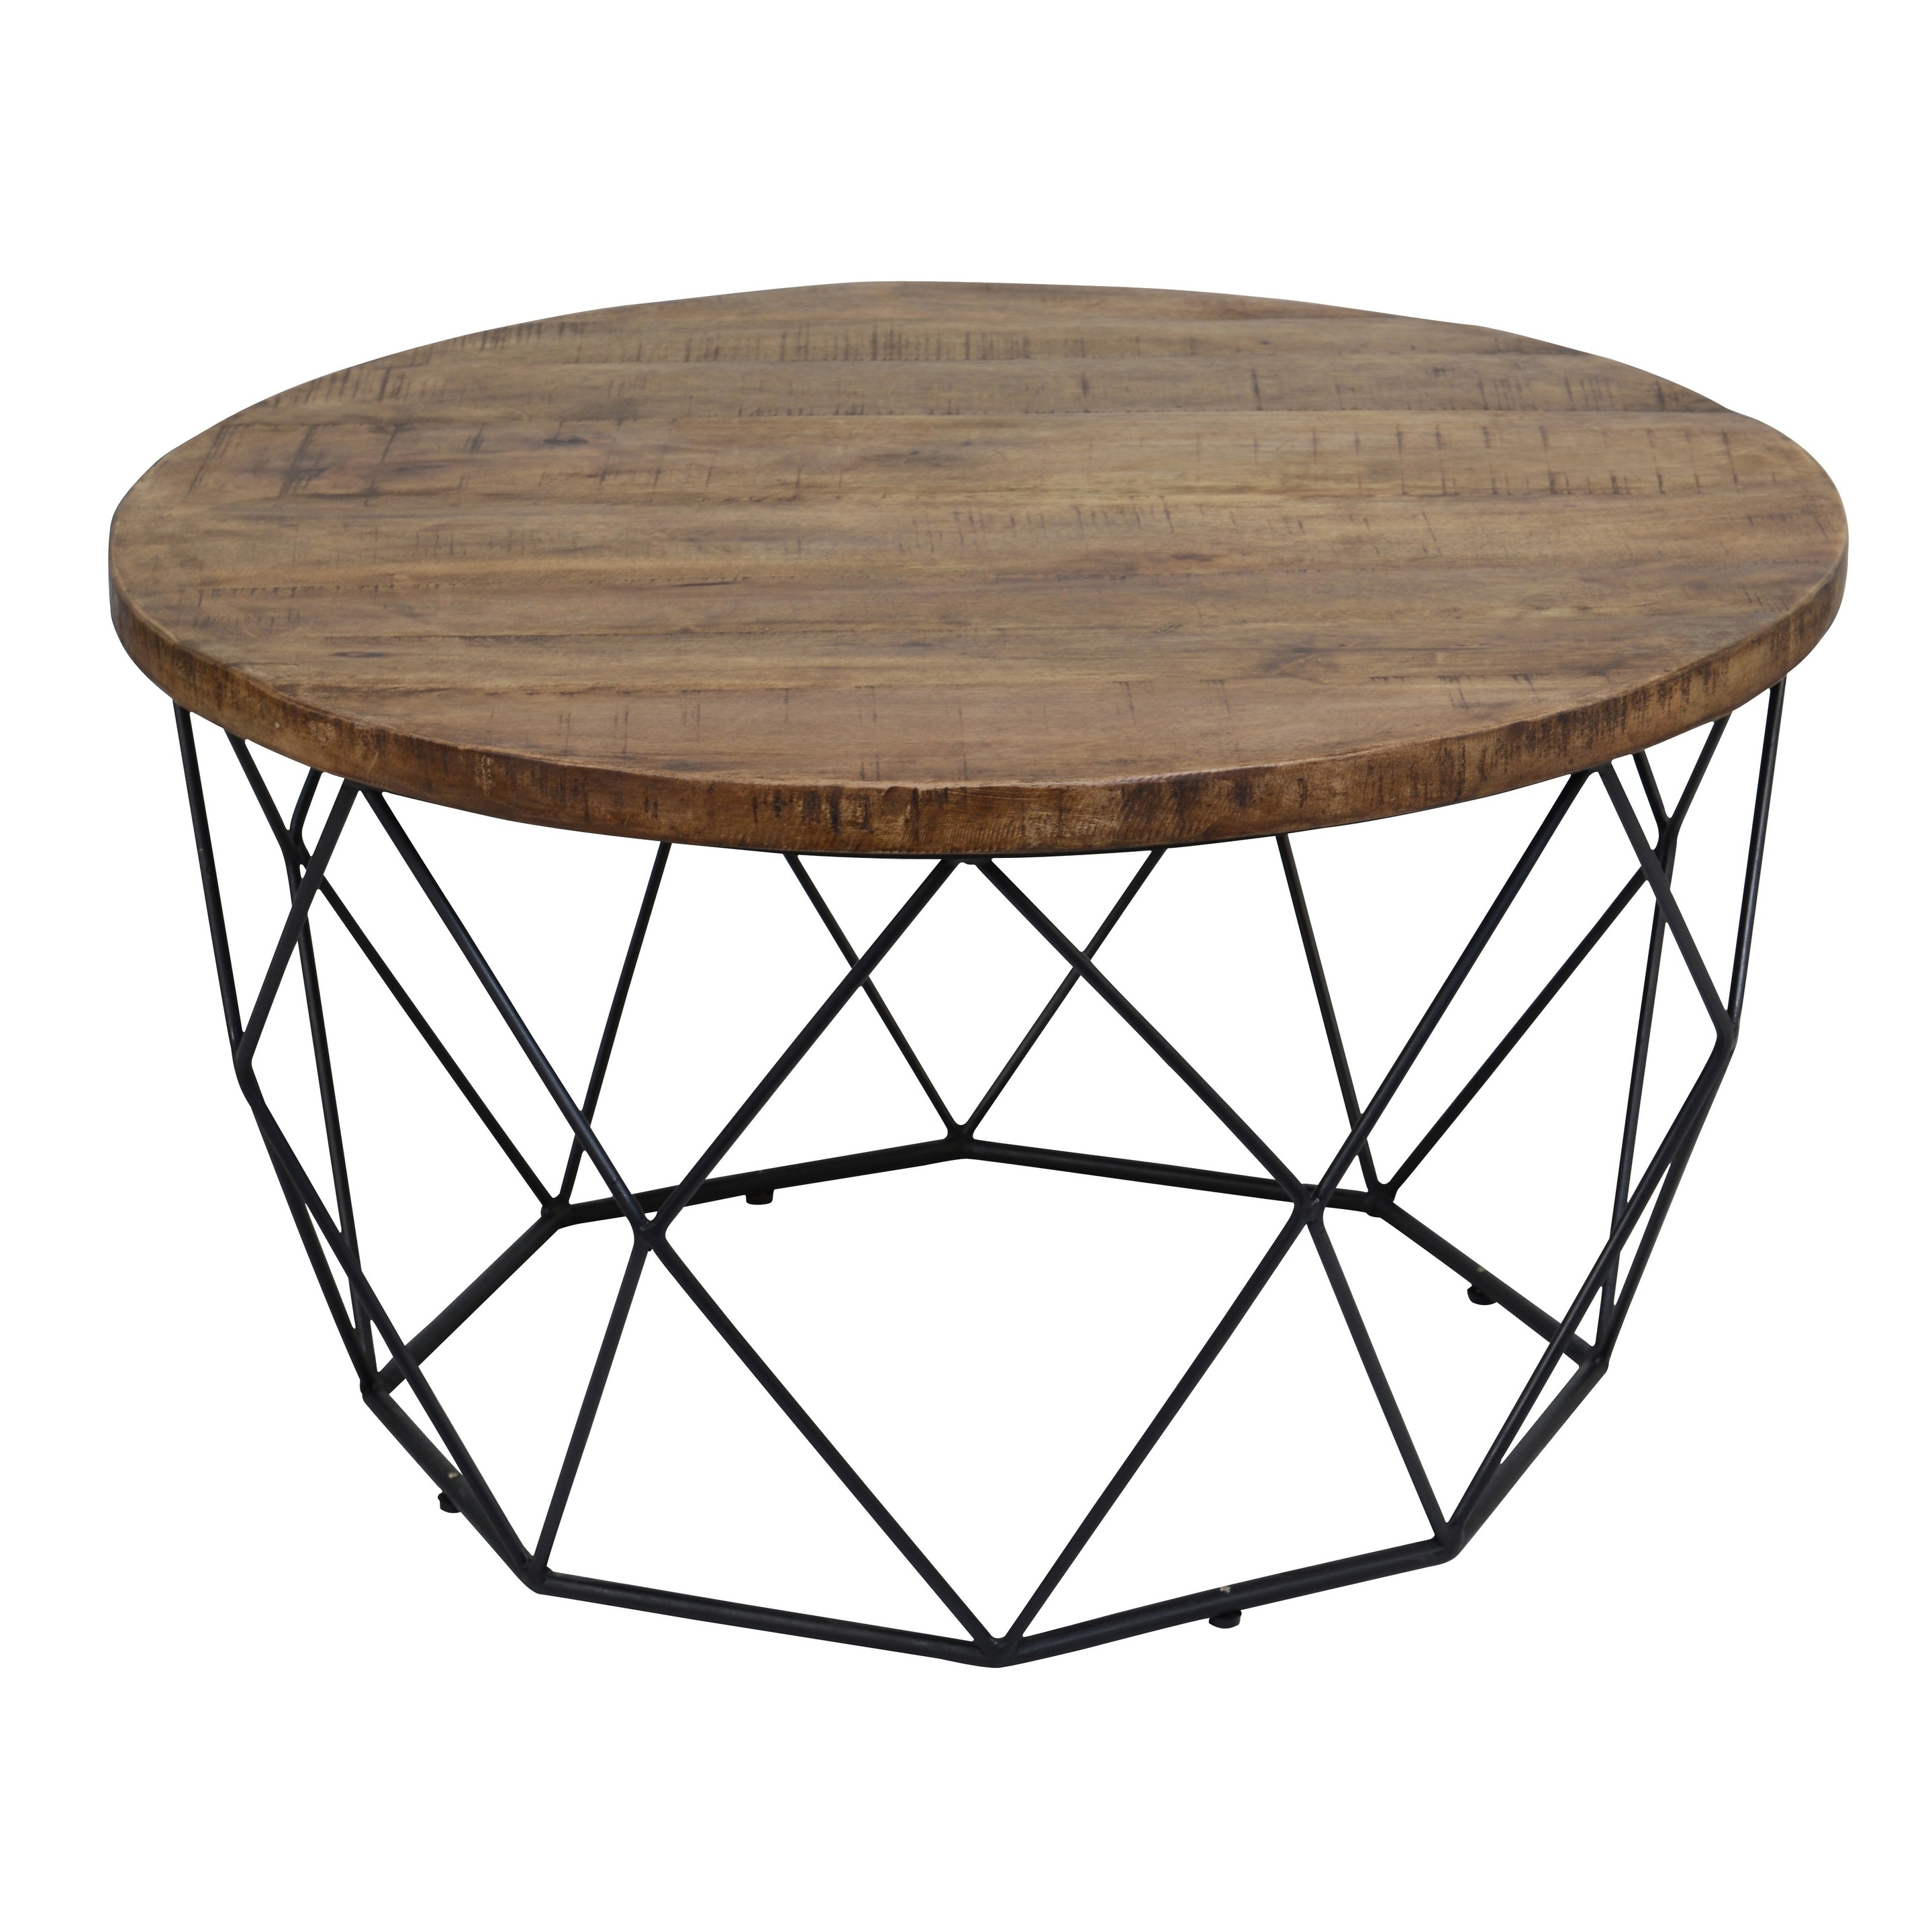 Round Wooden Coffee Table With Geometric Cutout Iron Base